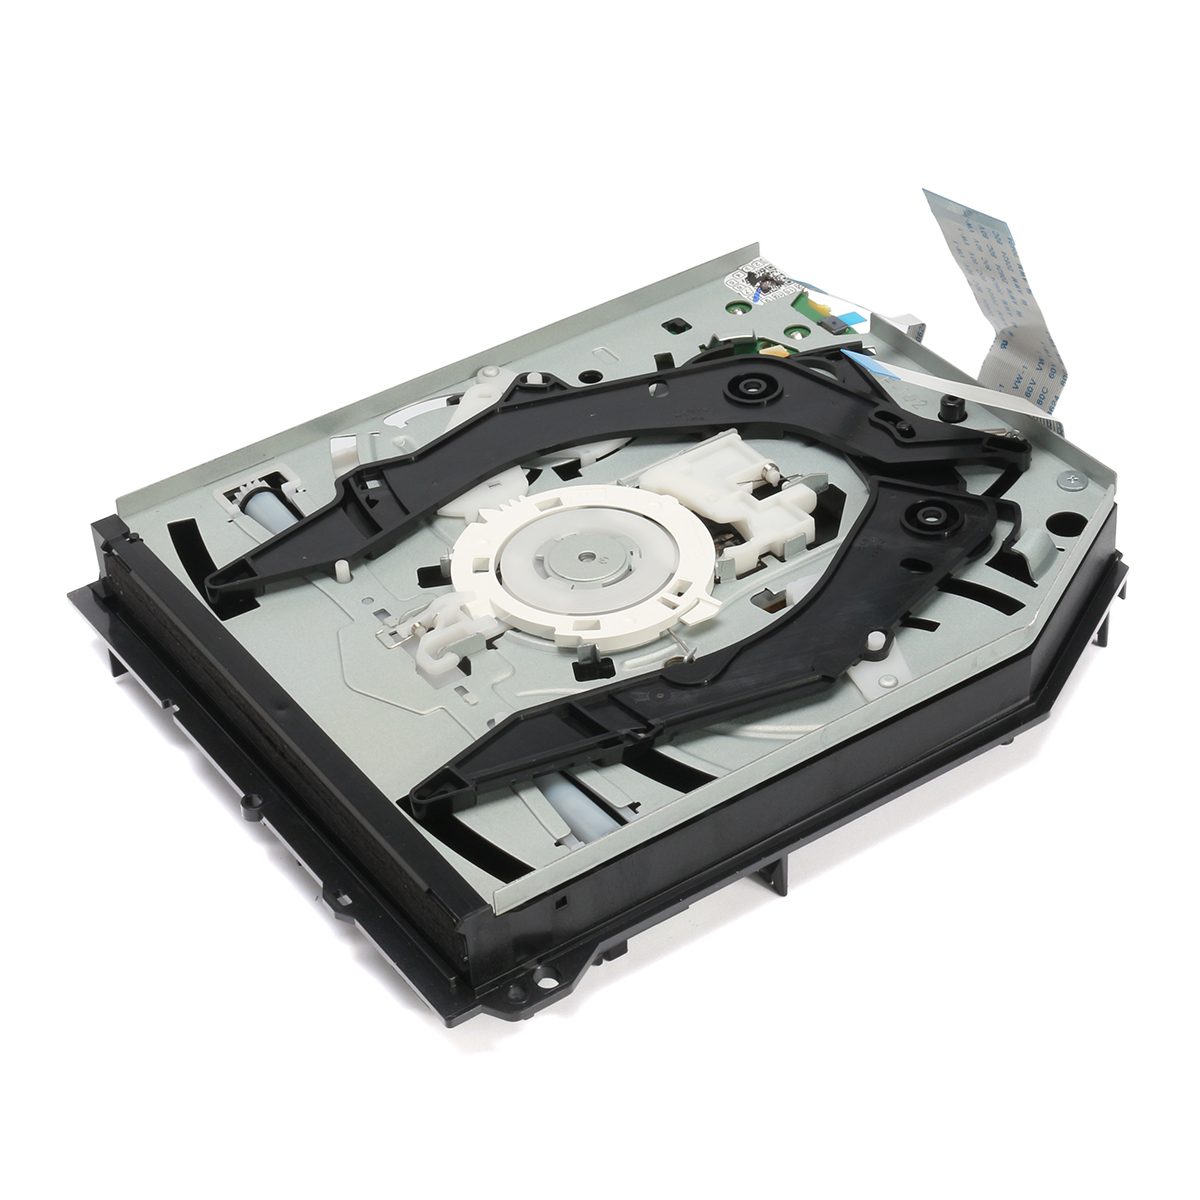 Blu-ray-Disk-CD-Drive-Replacement-Part-for-Sony-PS4-CUH-1215A-CUH-1215B-500GB-1TB-1332338-1